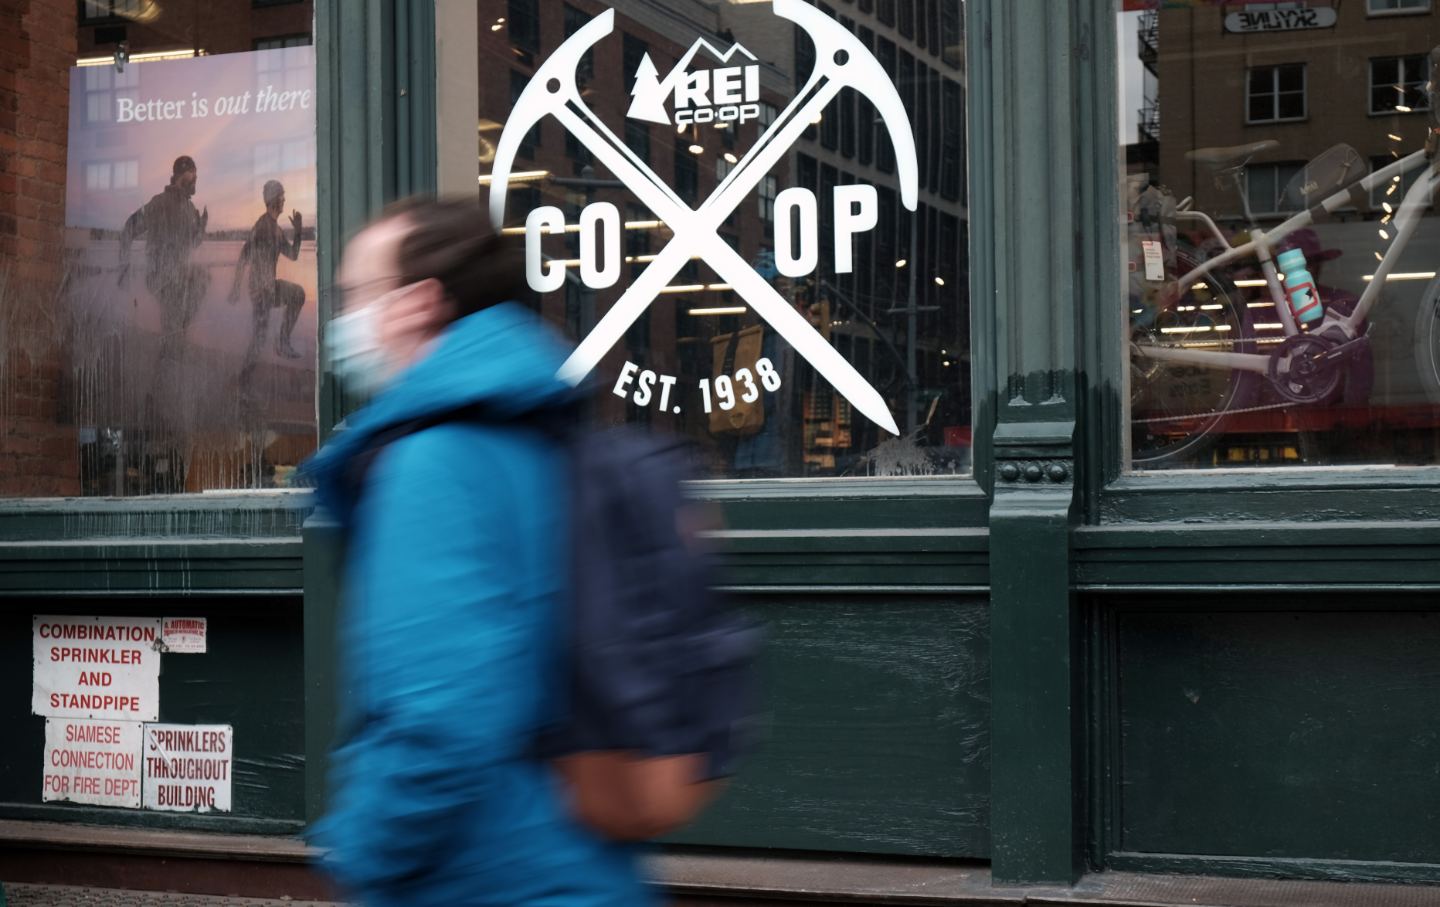 A man walks past a shop window with the REI logo on it,